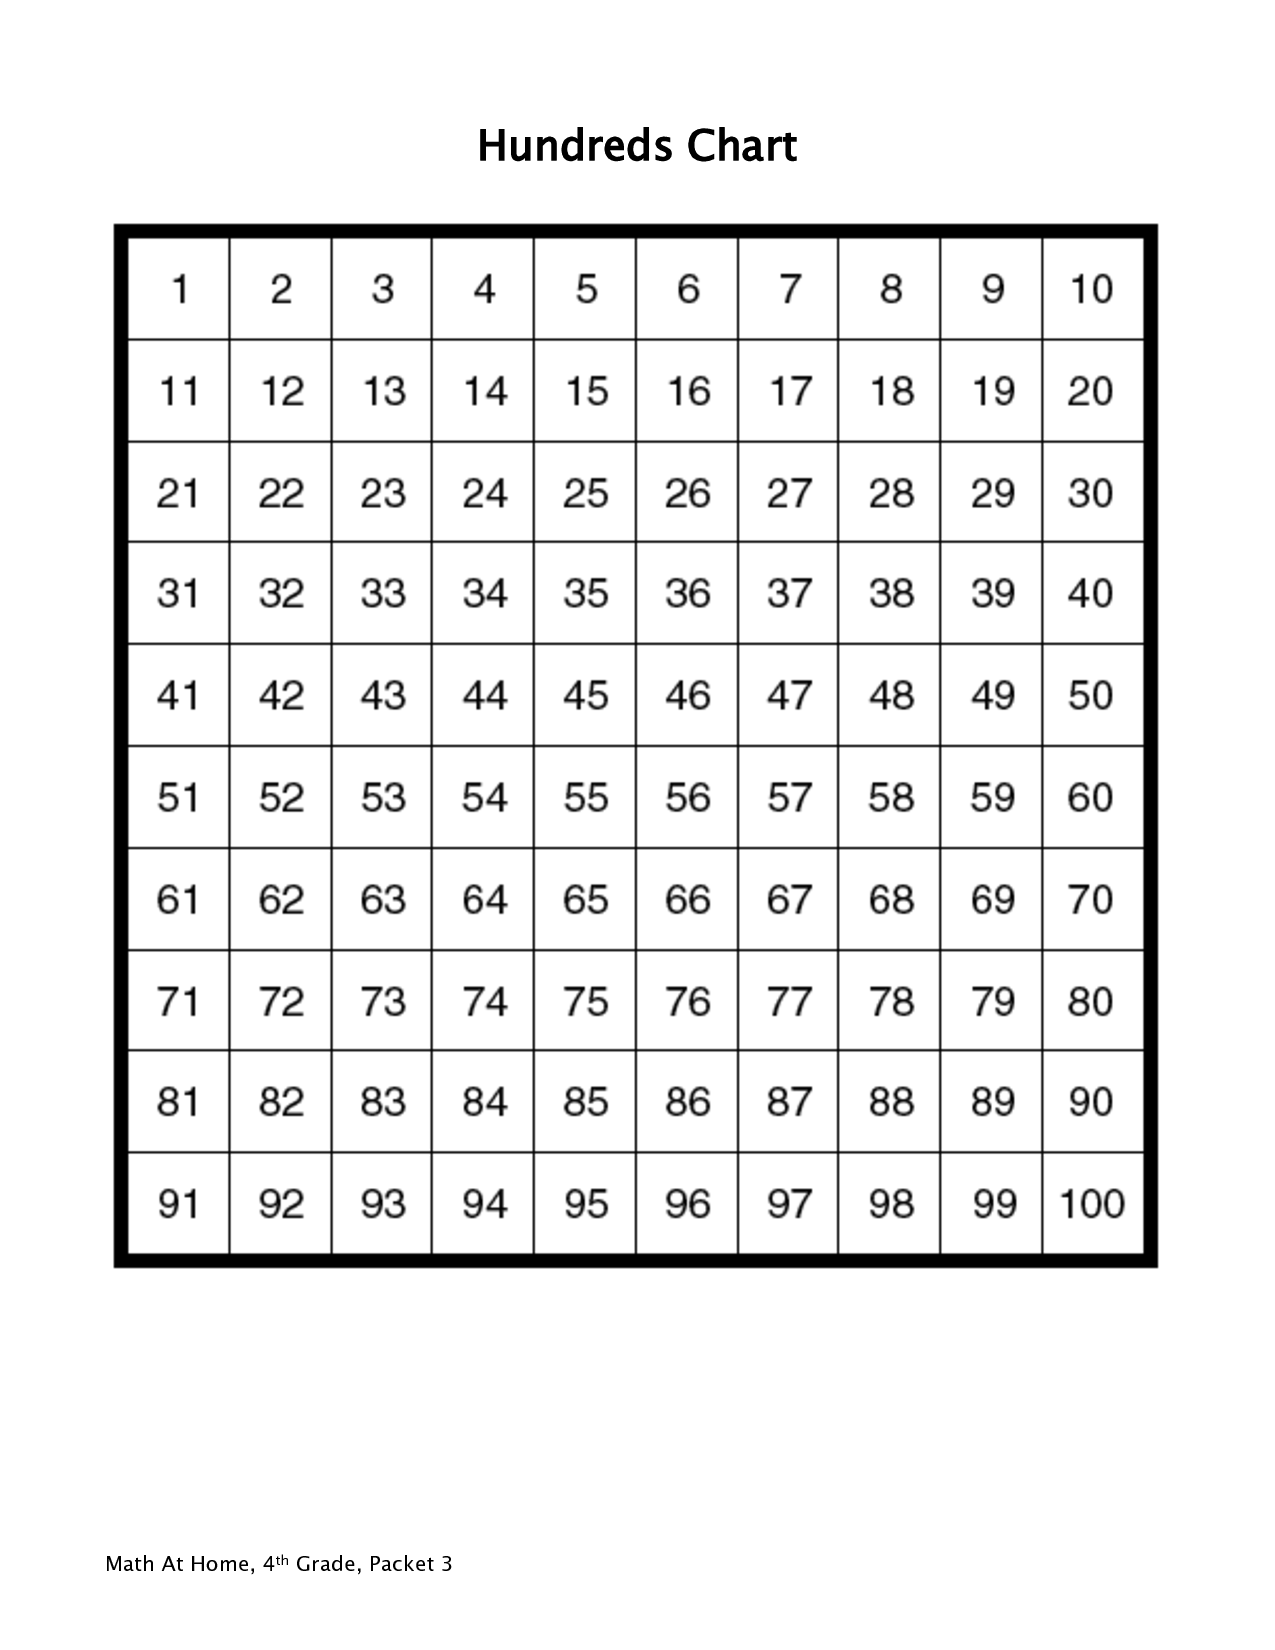 15 Best Images of I Spy 100 Worksheet - First Grade High Frequency